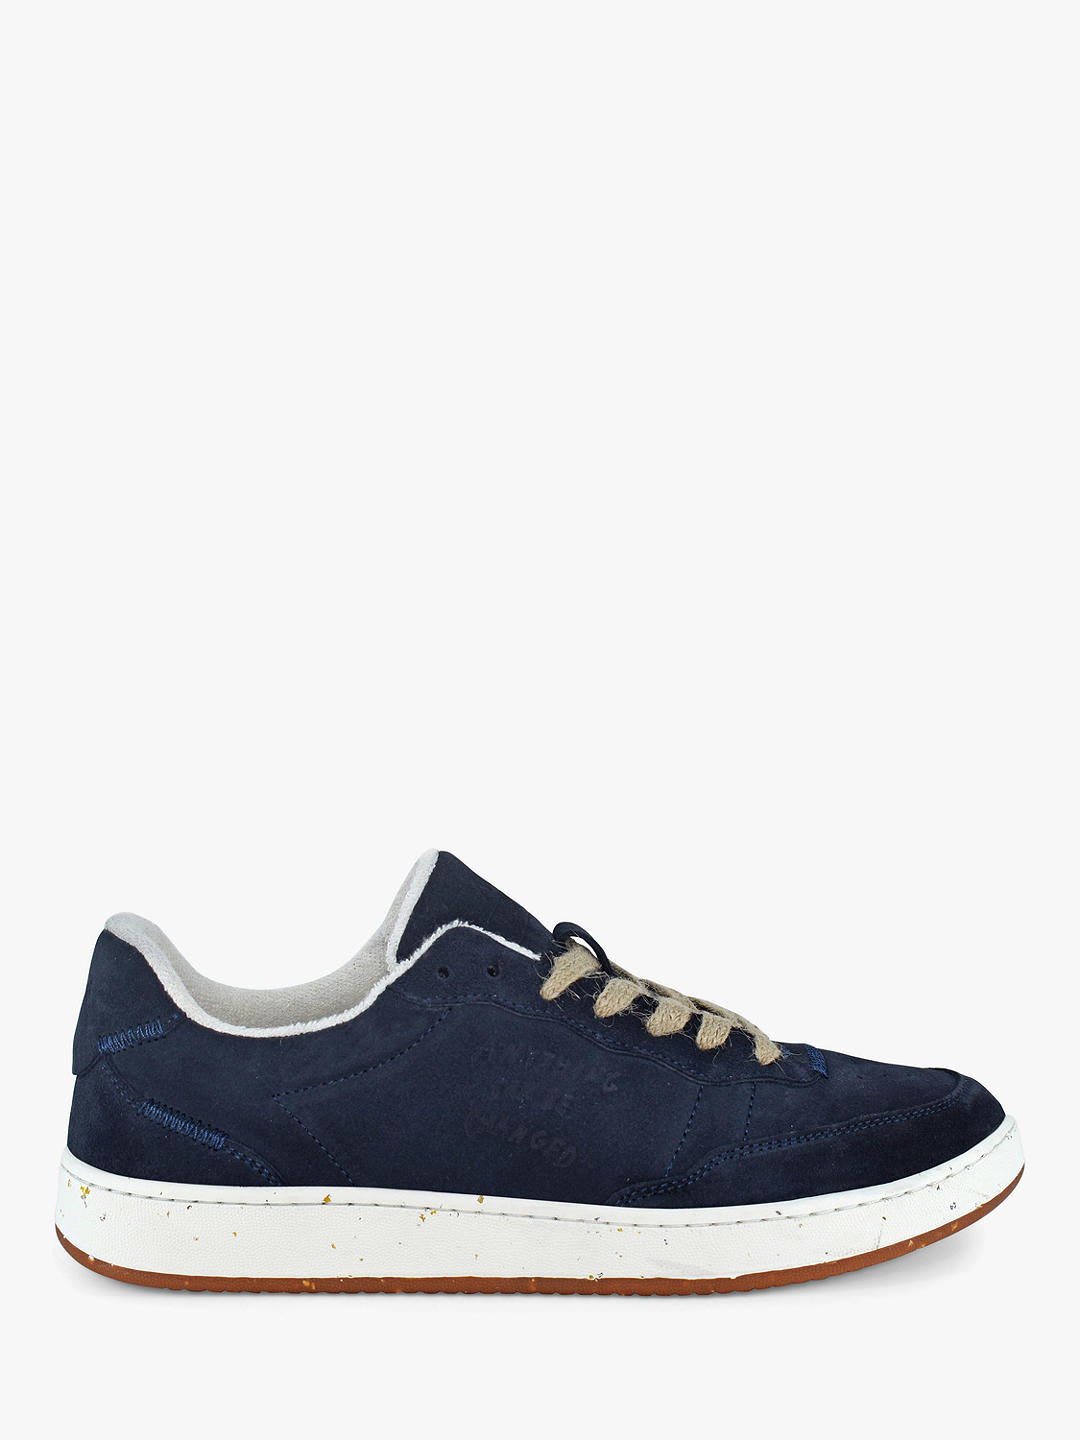 ACBC Evergreen Suede Trainer, Blue